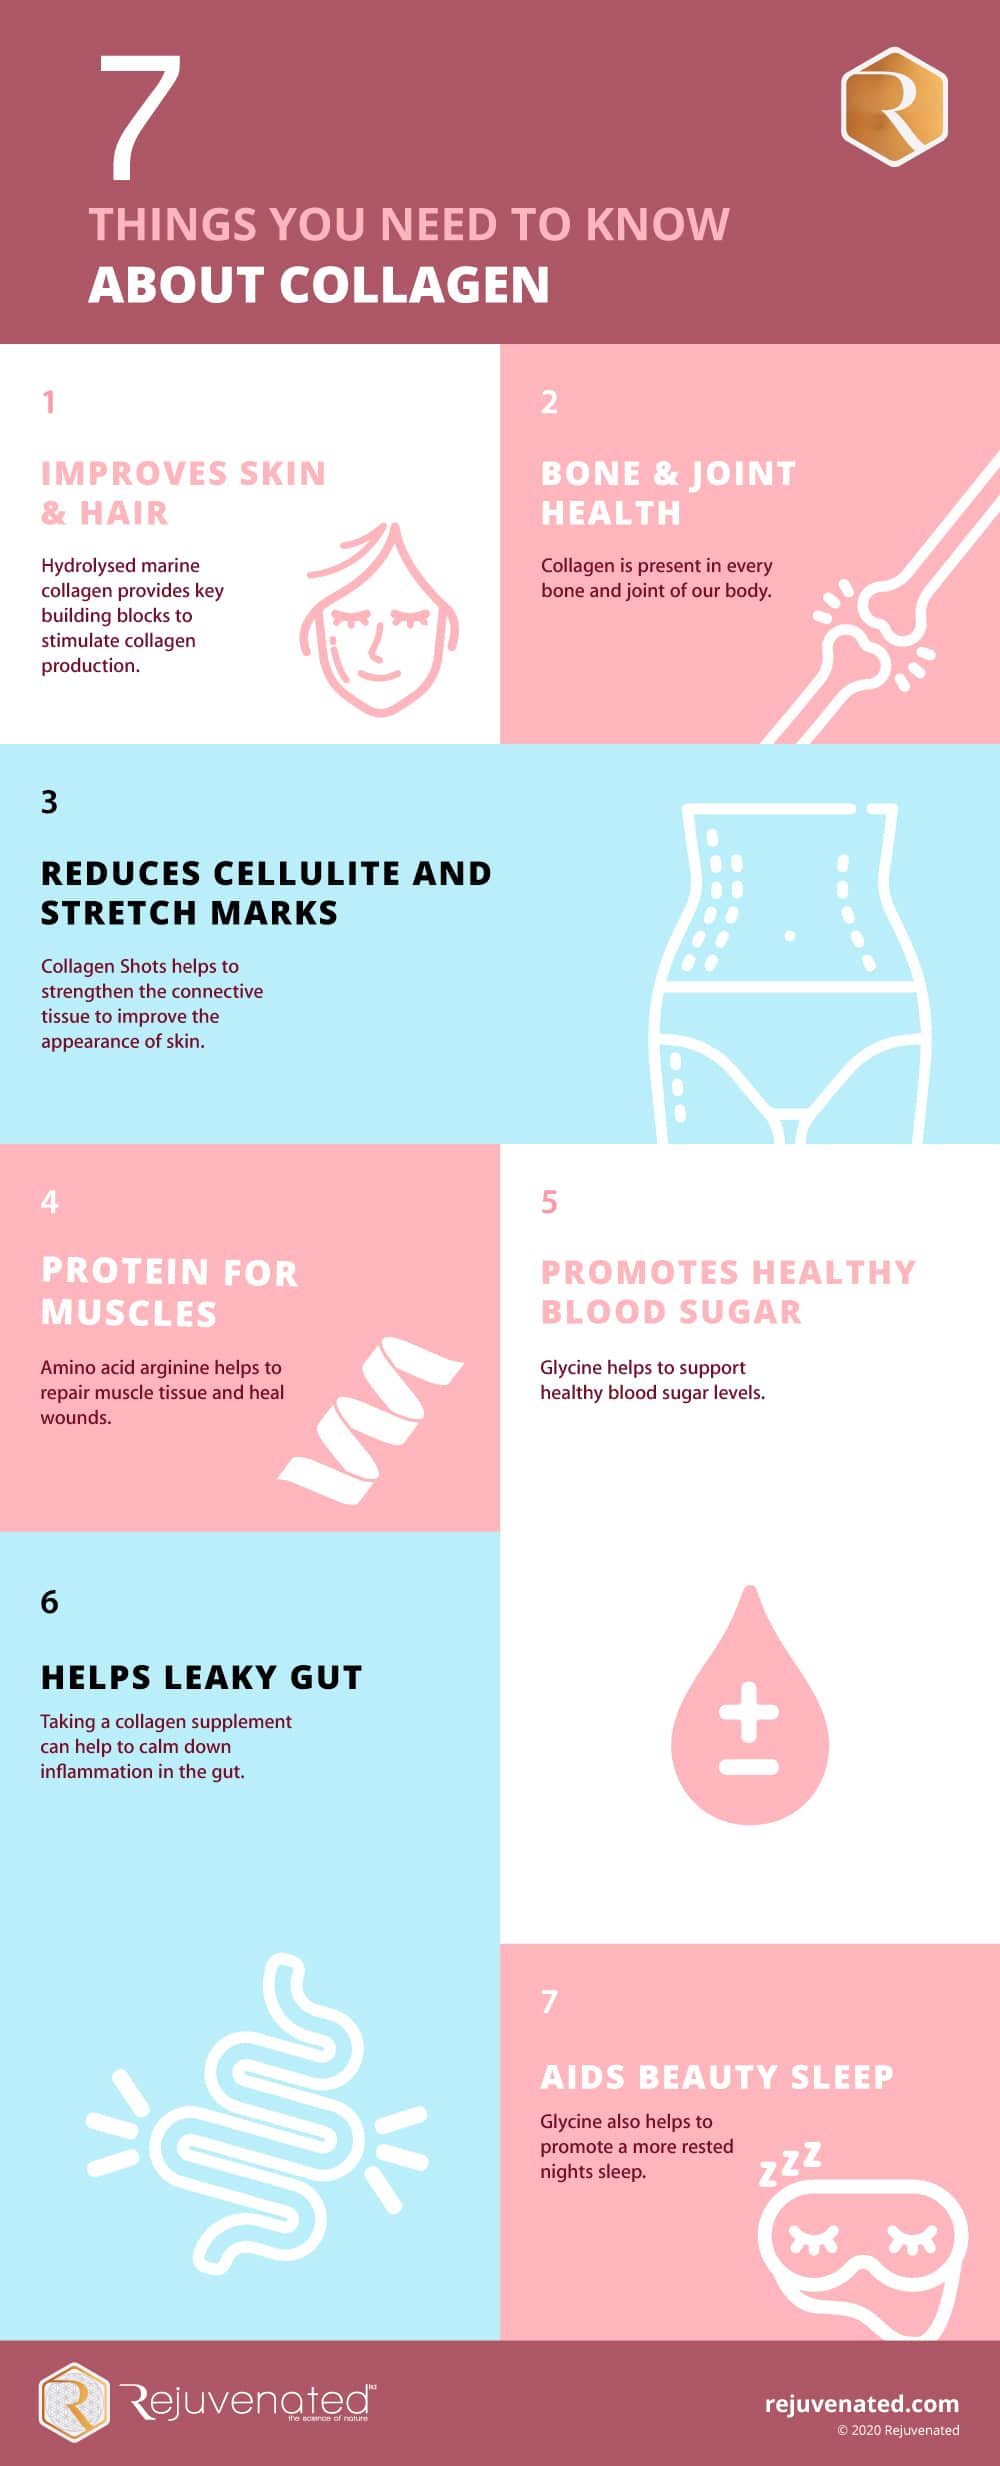 Things you need to know about collagen